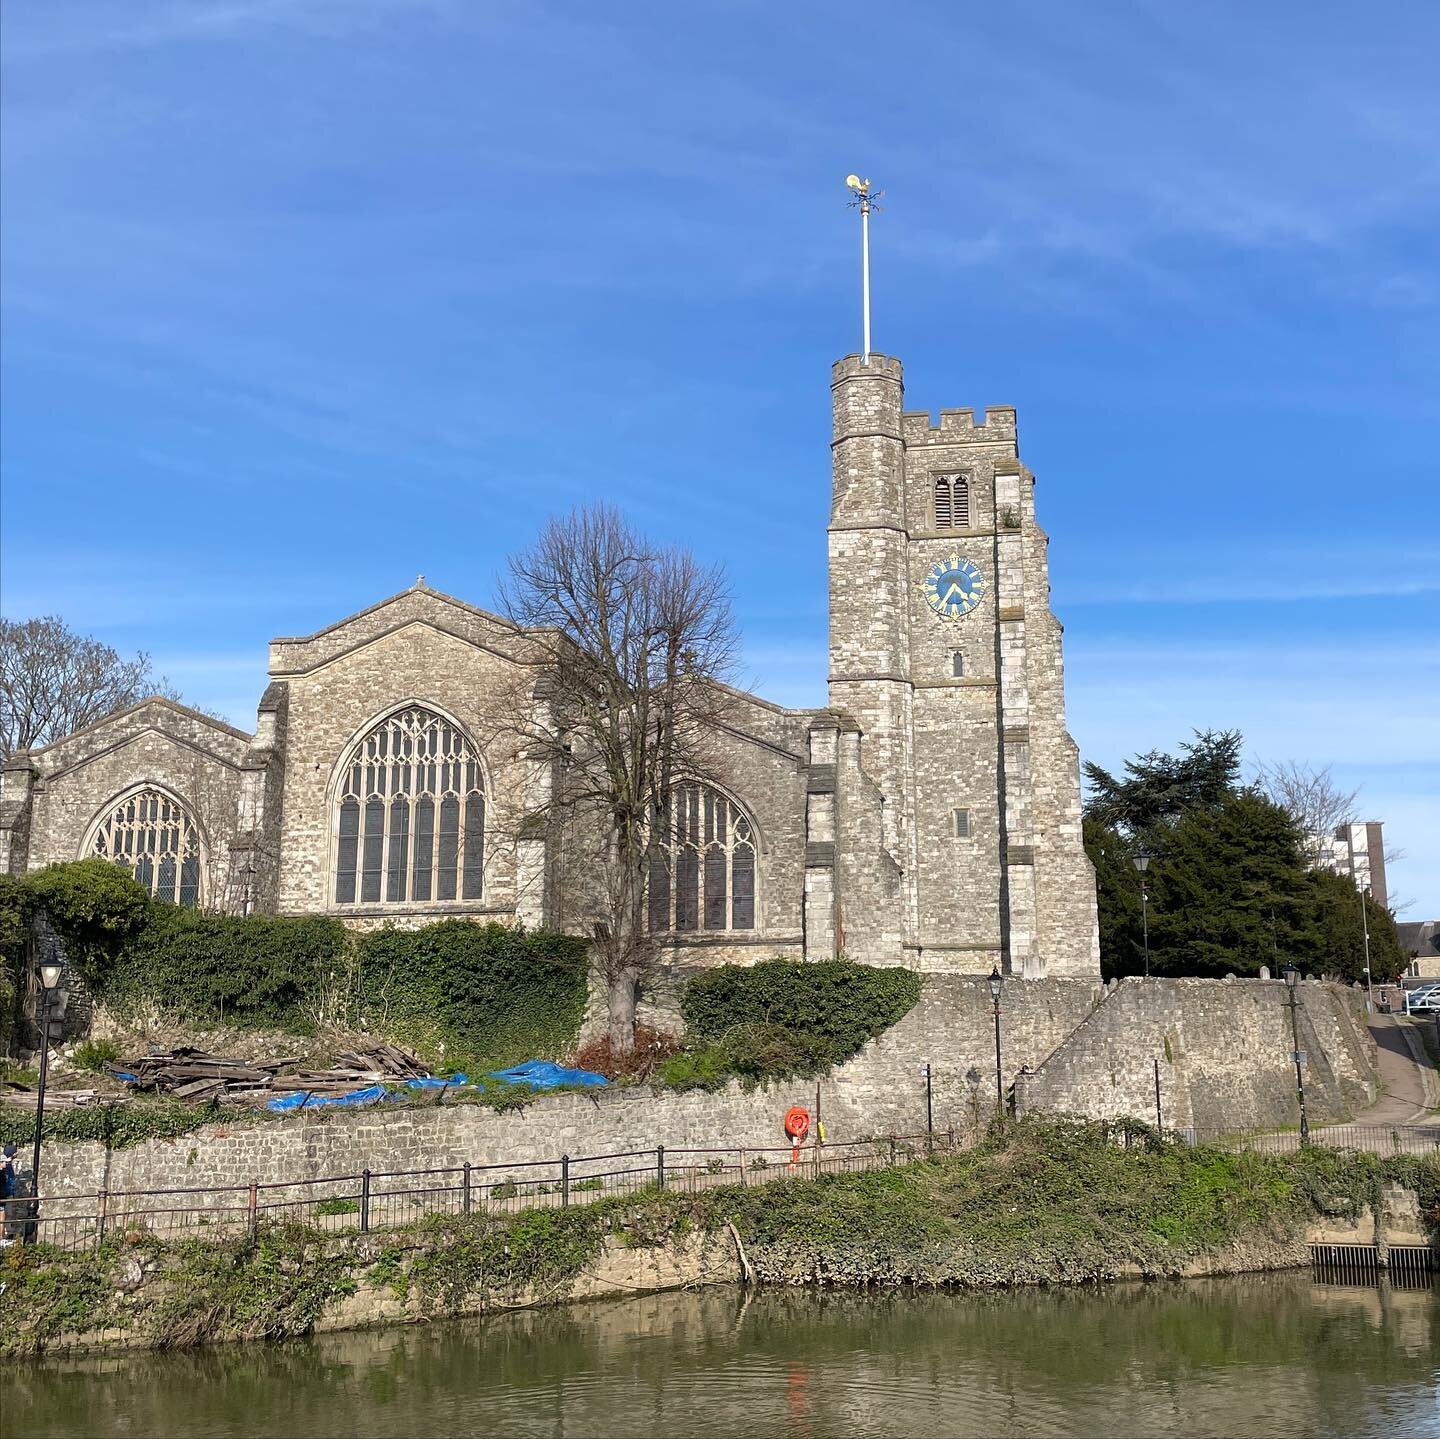 All Saints Church in Maidstone is from 1395 and it&rsquo;s the widest parish church in the country. I think this is such a great claim to fame. I went inside and it is undeniably wide. It sits on the lovely river Medway but nicely high up, out of the